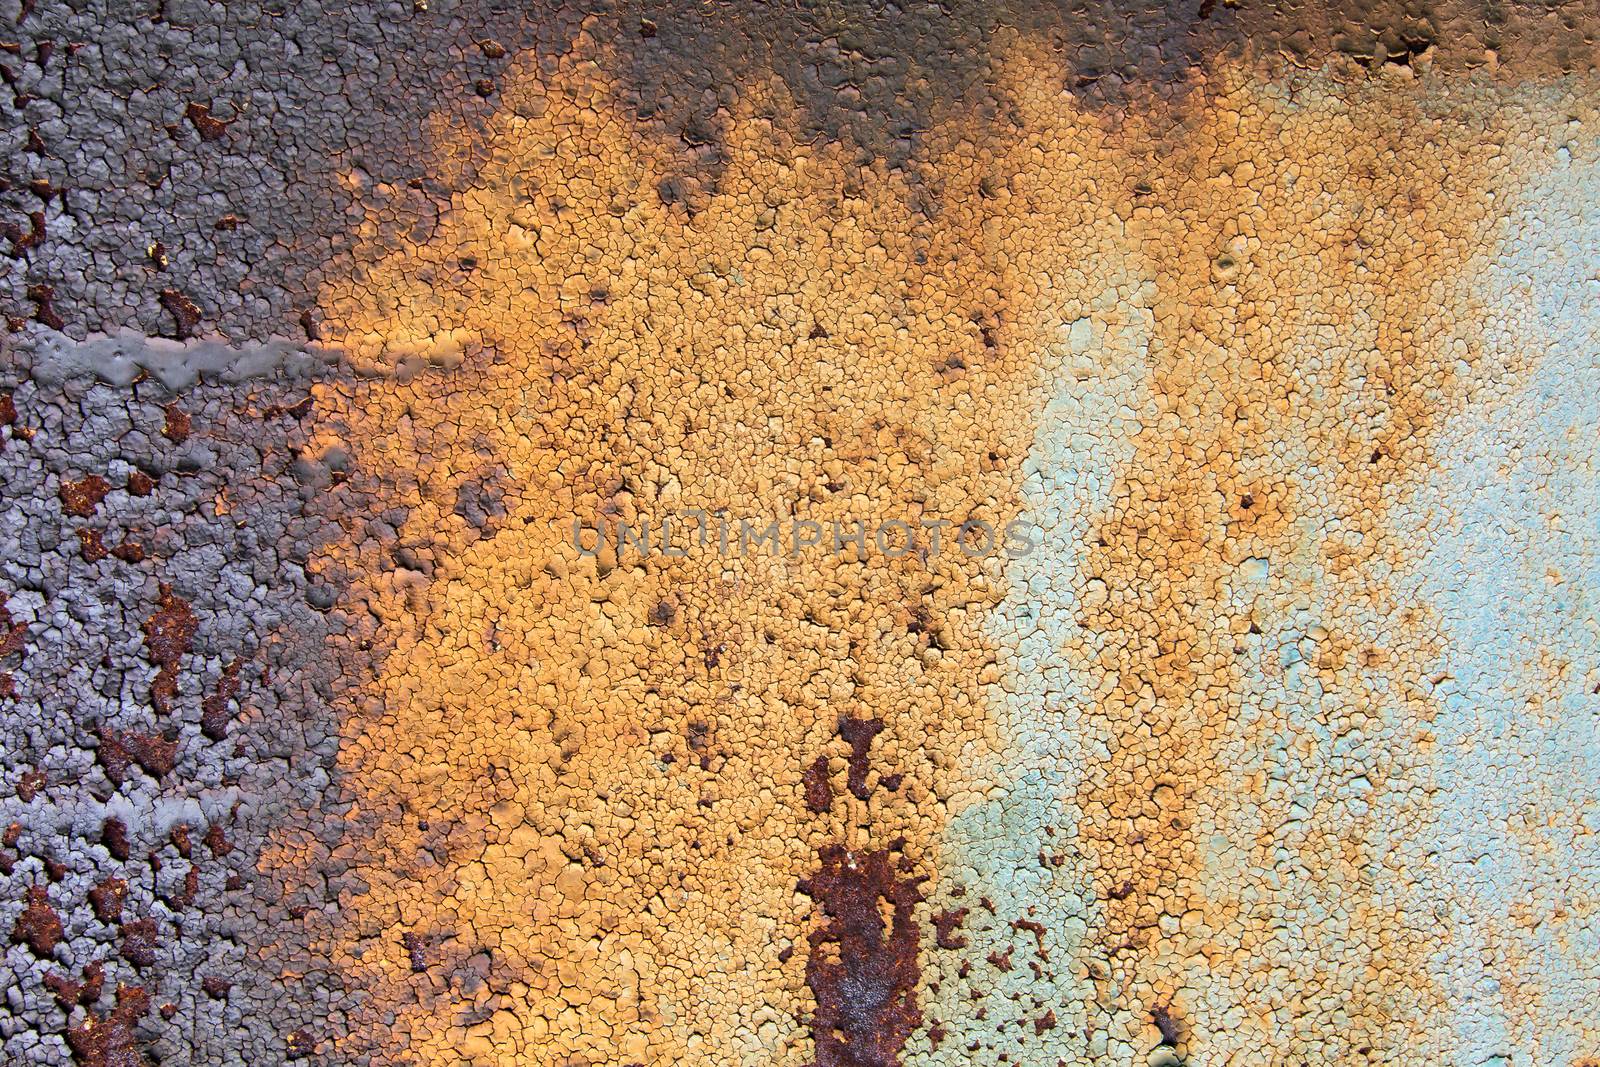 Detail of the old rusty metal - flaky paint